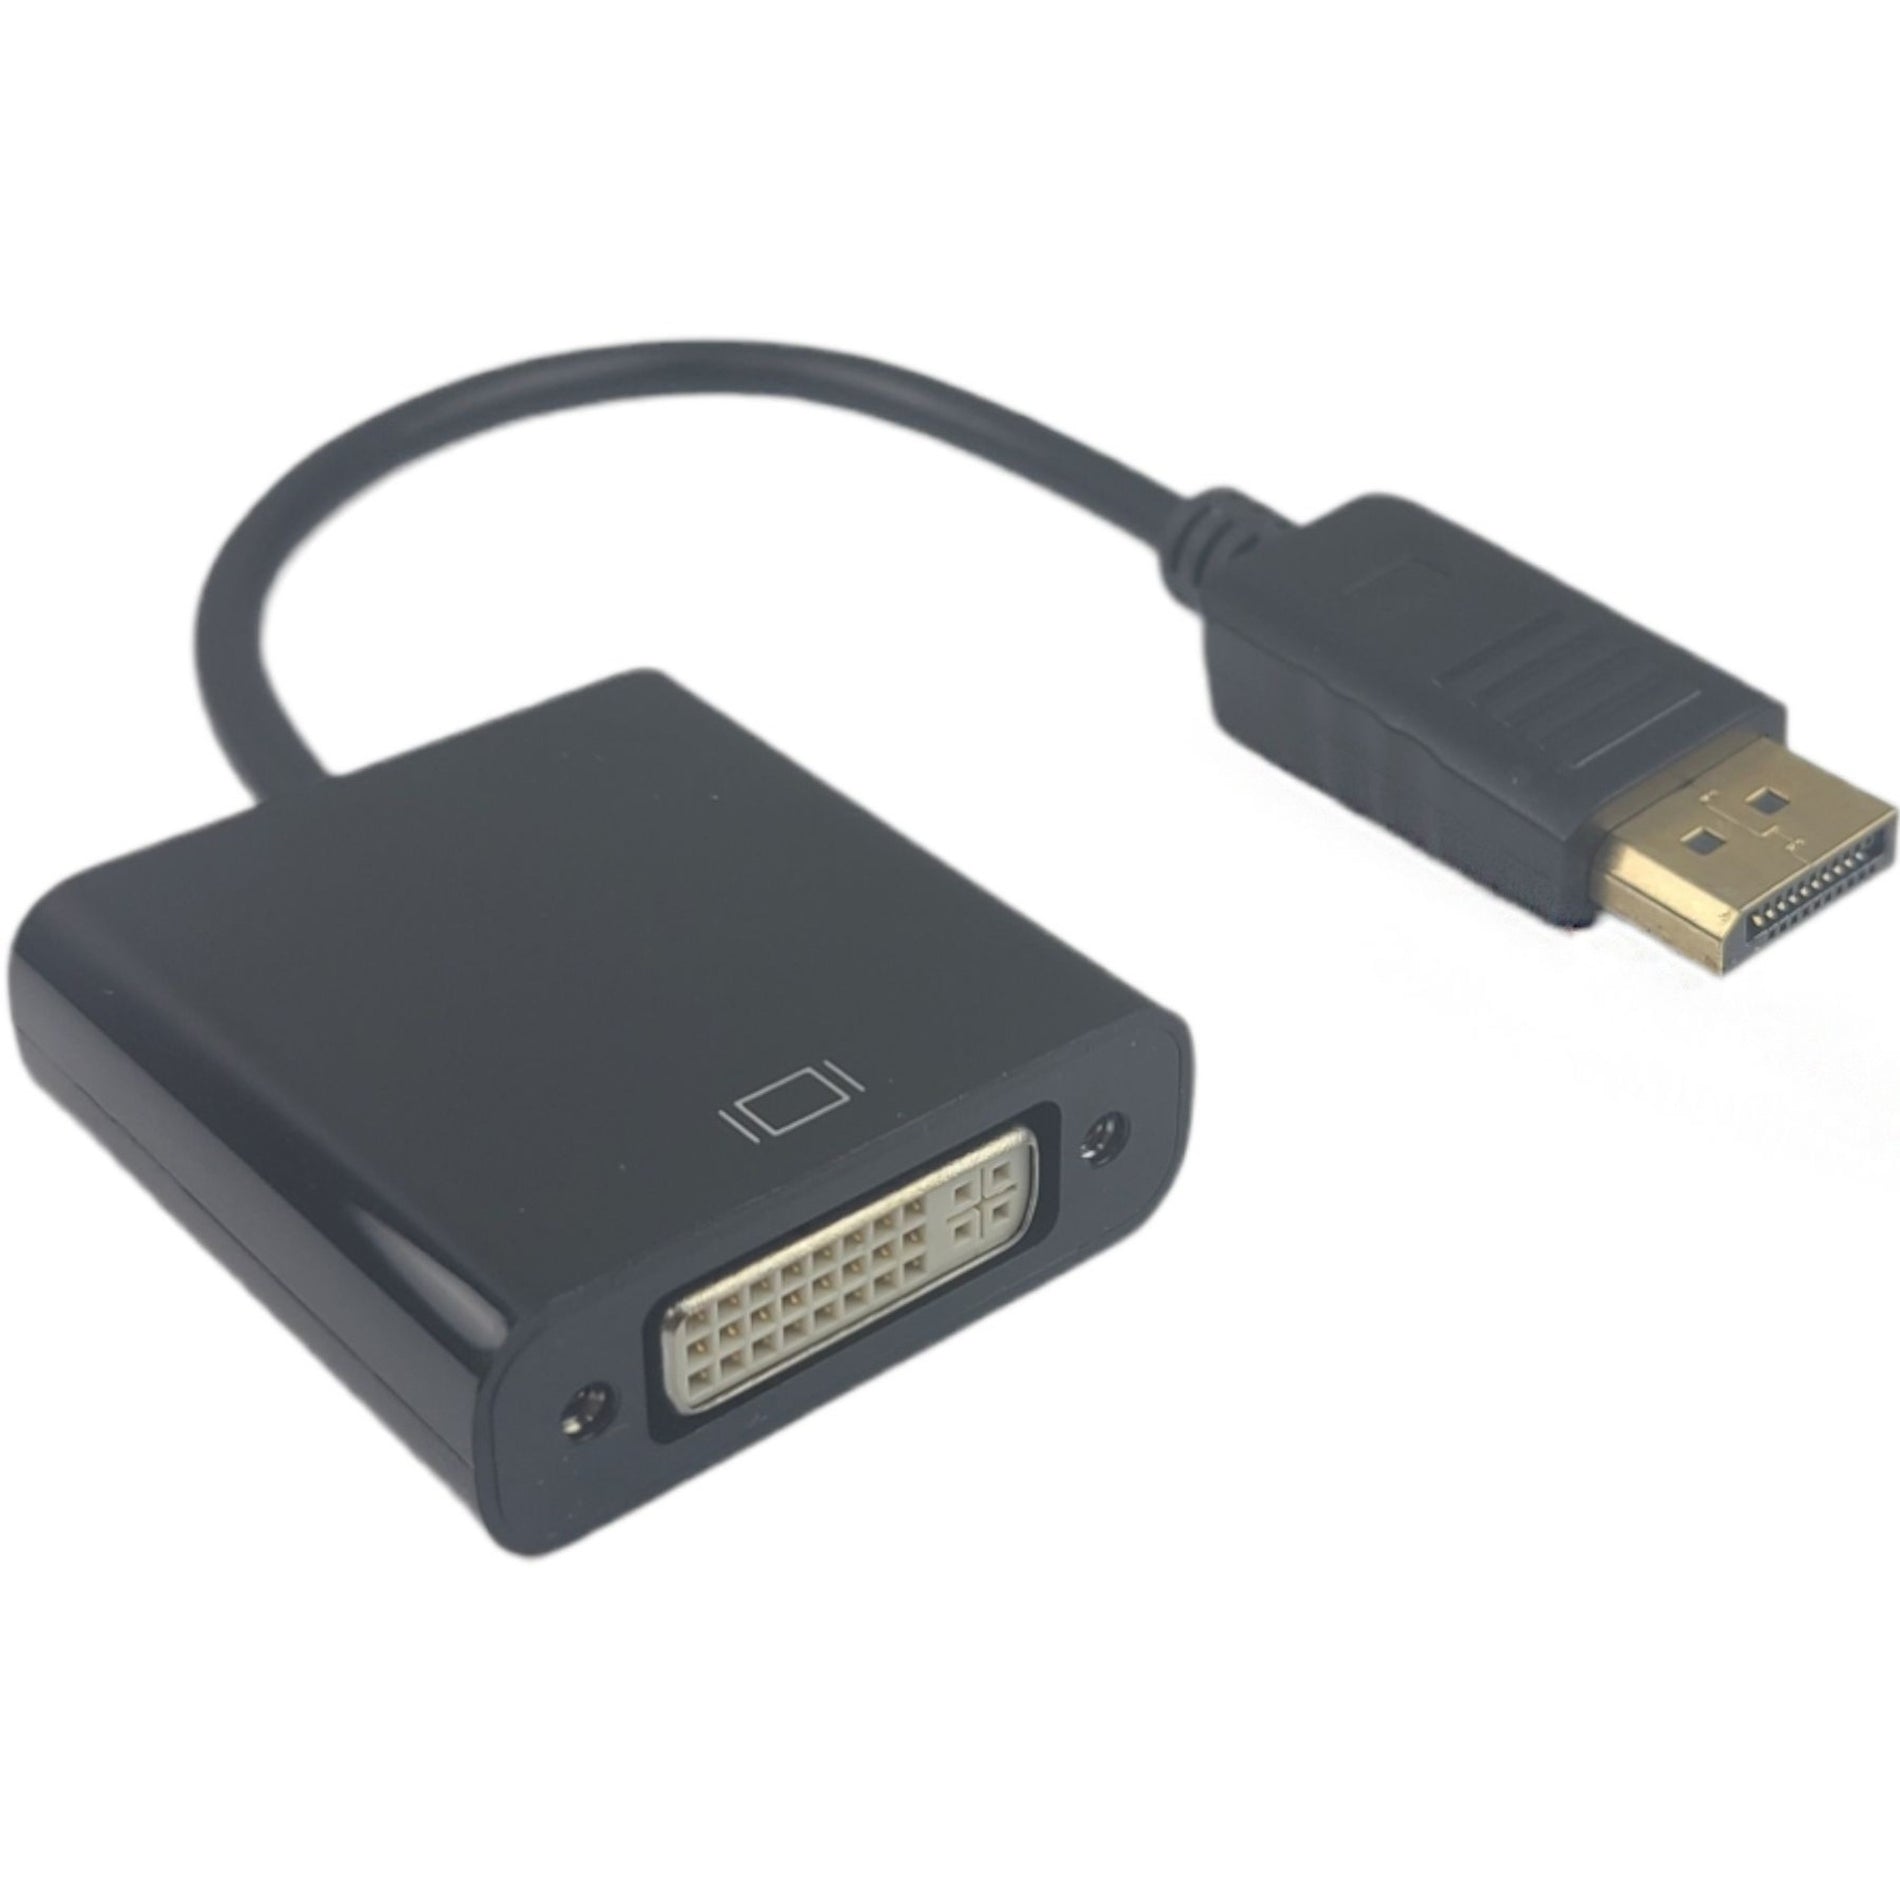 4XEM 4XDPDVID DisplayPort To DVI-D Dual Link Adapter, Video Cable, 9.9 Gbit/s Data Transfer Rate, 3840 x 2400 Supported Resolution